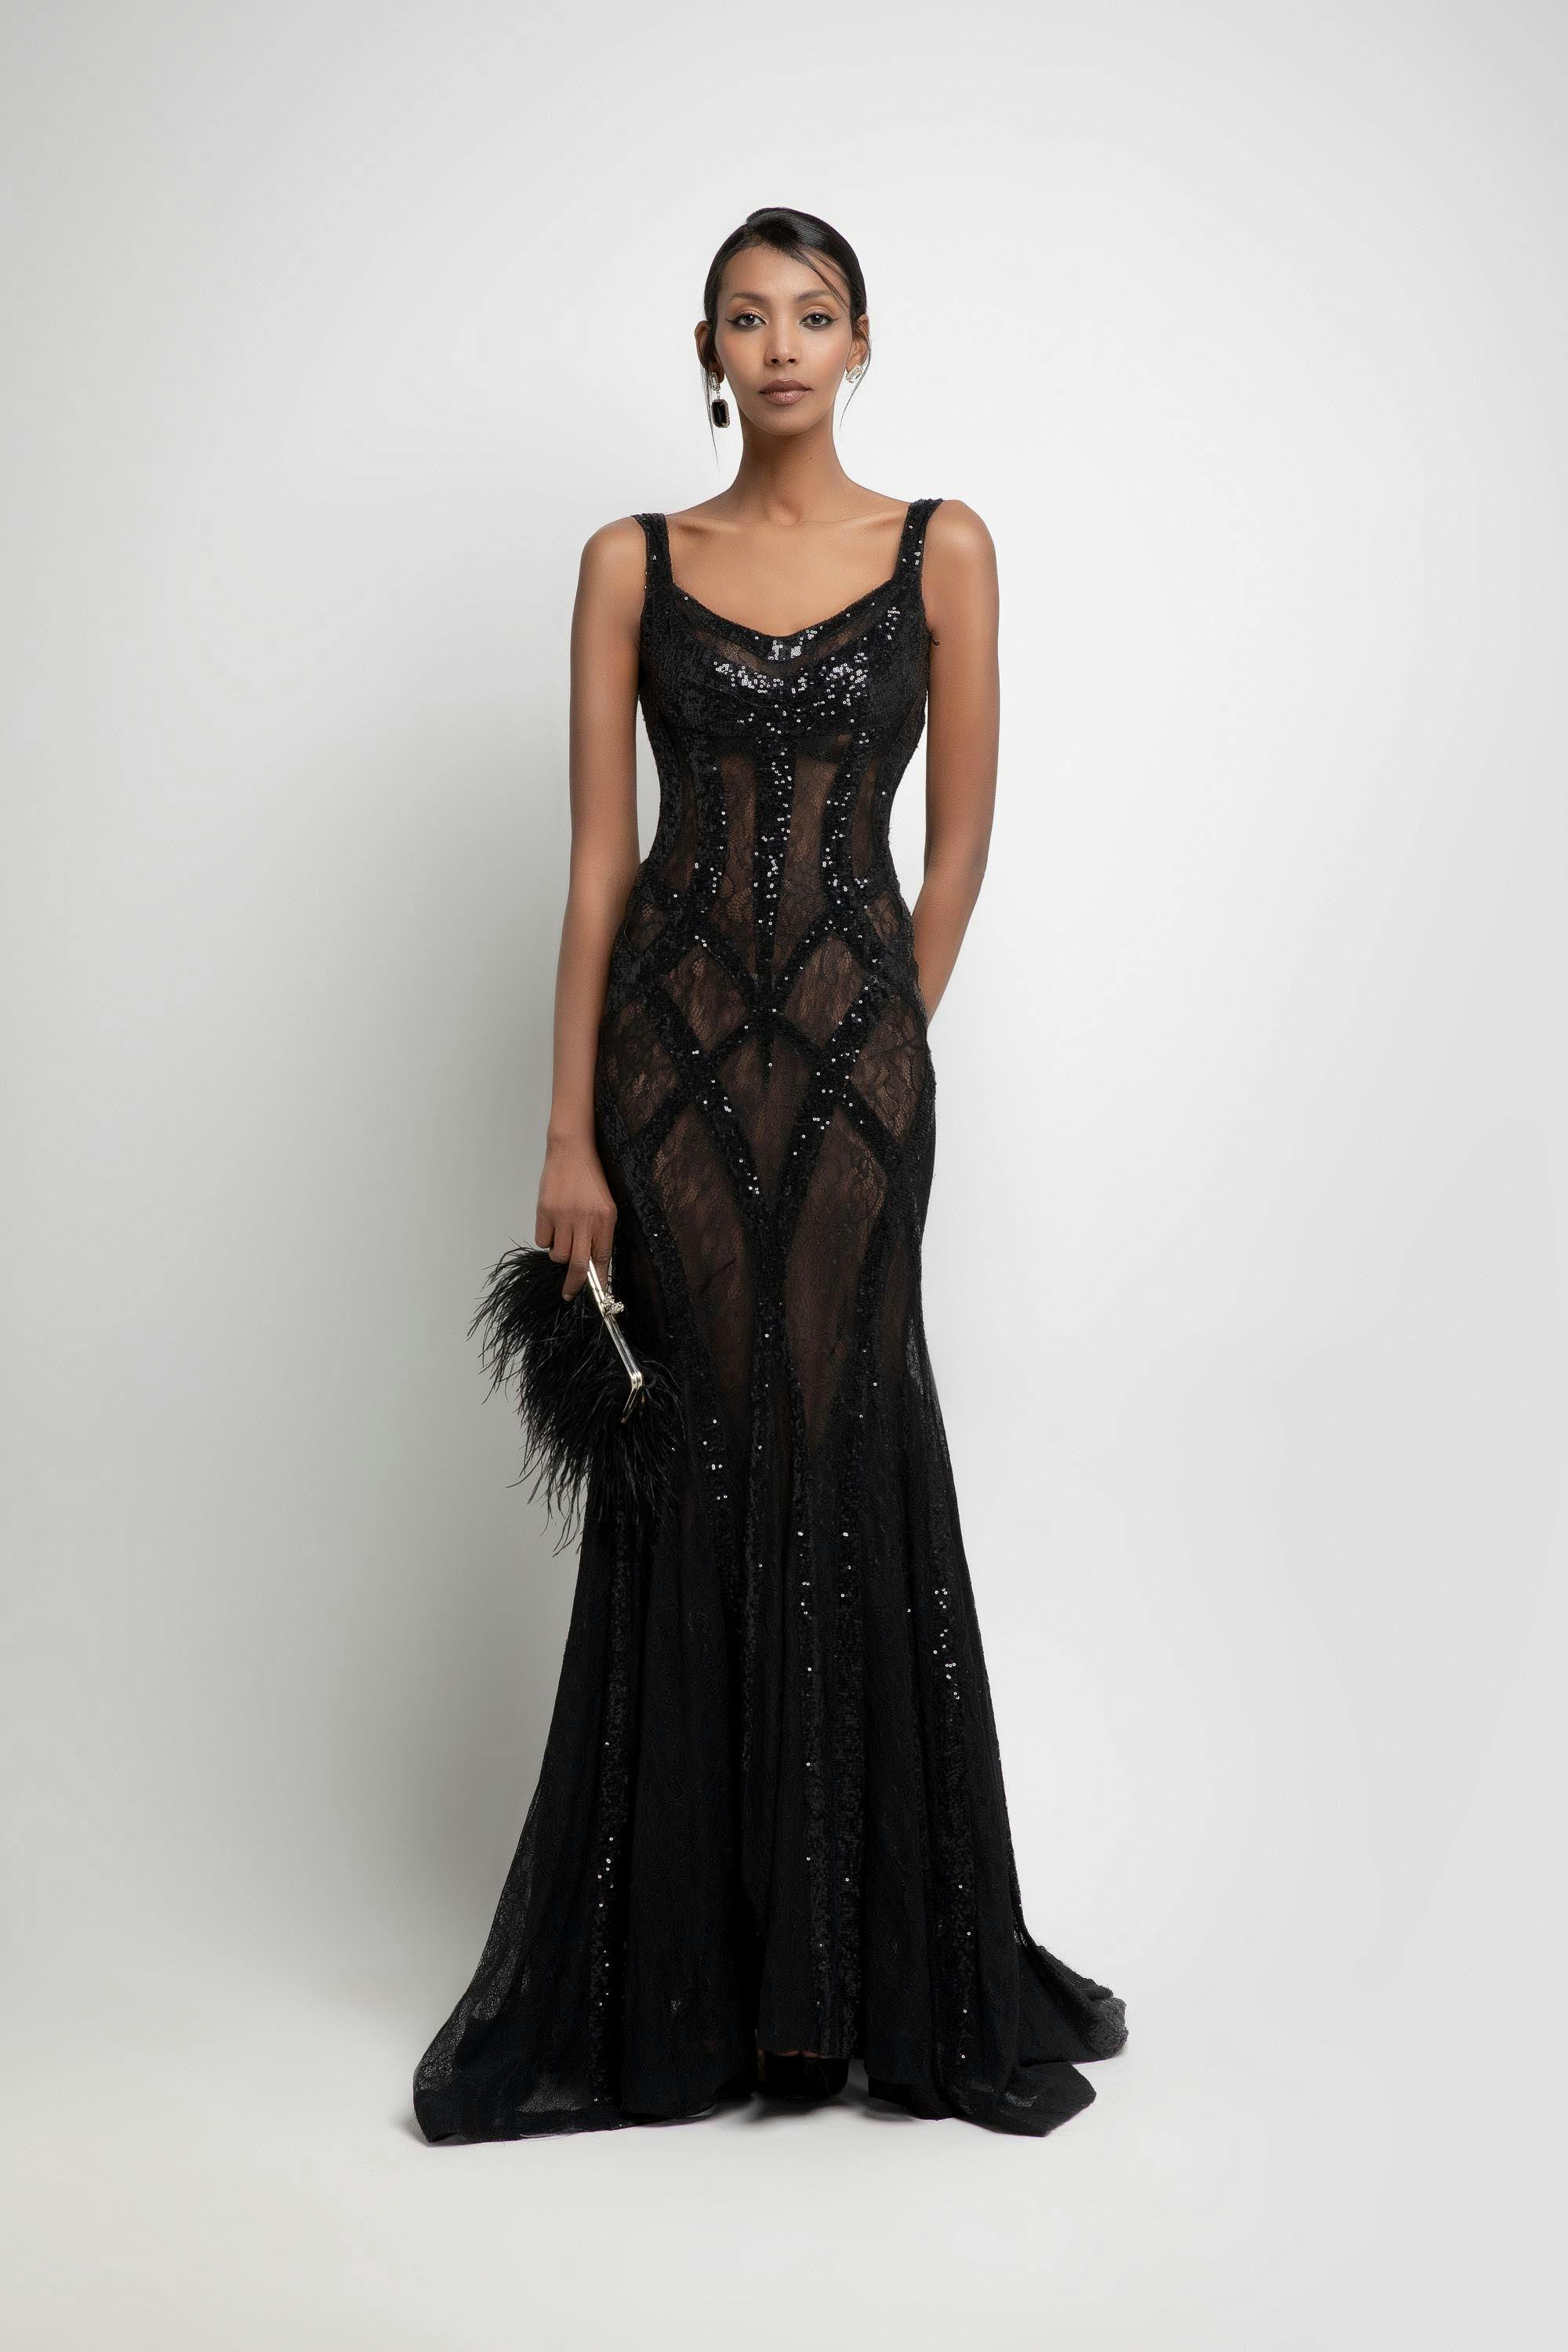 Look 10 A - Jean fares couture - JFC- maxi black transparant dress with gliter